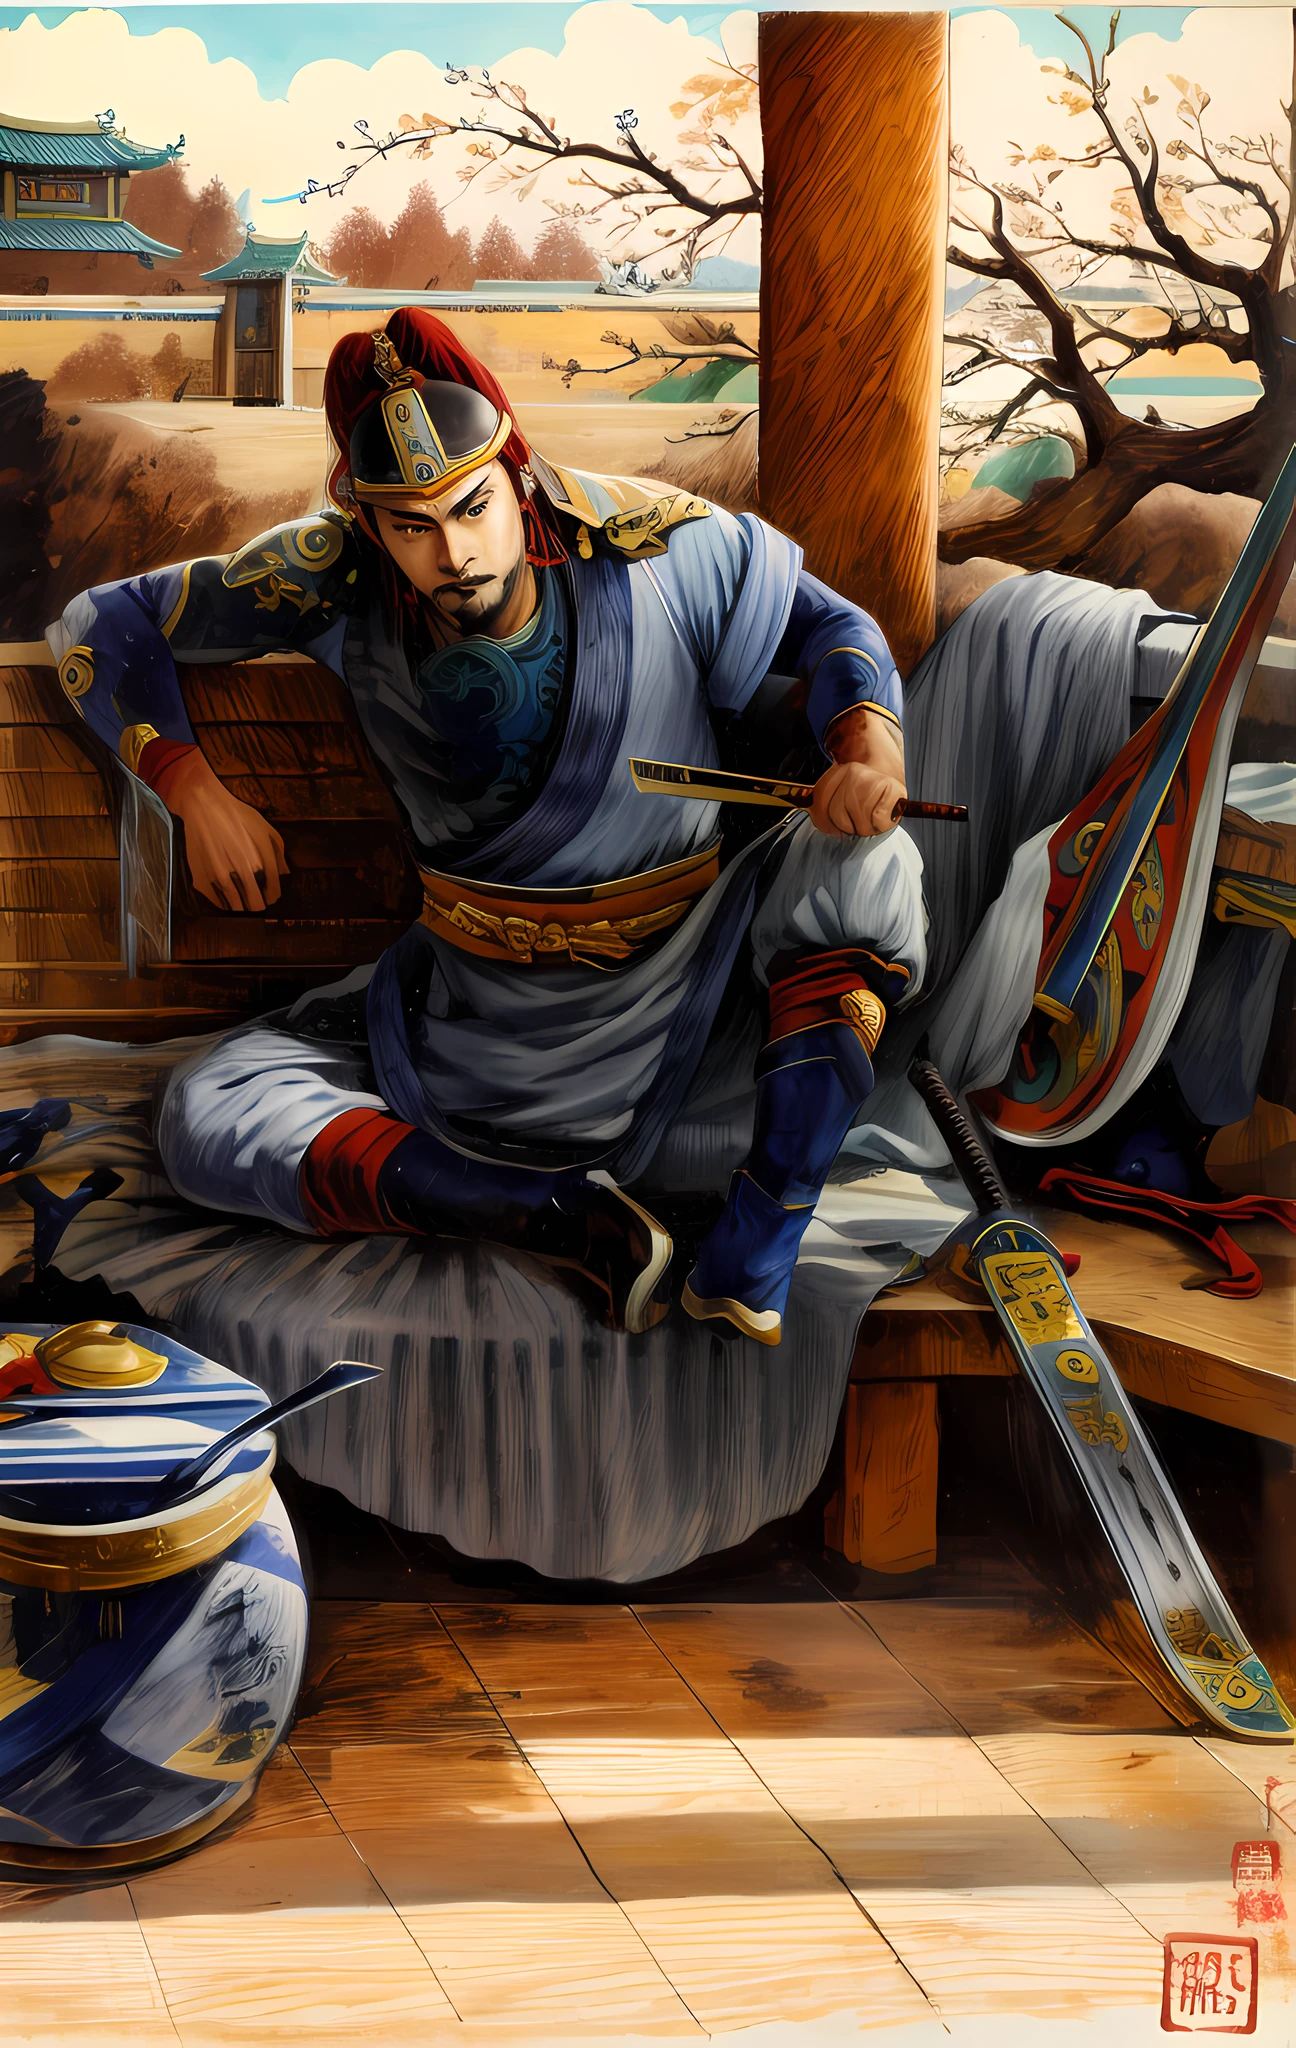 Draw a Song Dynasty warrior sitting on a bench with a fan, Inspired by Chen Danqing, Chinese Warrior，author：Zhang Daqian was inspired by Yang Borun, Fanart, by Ni Yuanlu, Inspired by De Dunbang, inspired by Wang Jian, author：Chen Danqing, inspired by Lu Zhi, author：Yoon Du-seop, atlantean warrior, inspired by Li Kan, tai warlord, epic full color illustration, Snoop dogs as barbarians, ancient warrior, Chinese Warrior, naranbaatar ganbold, Bandits, zhangfei